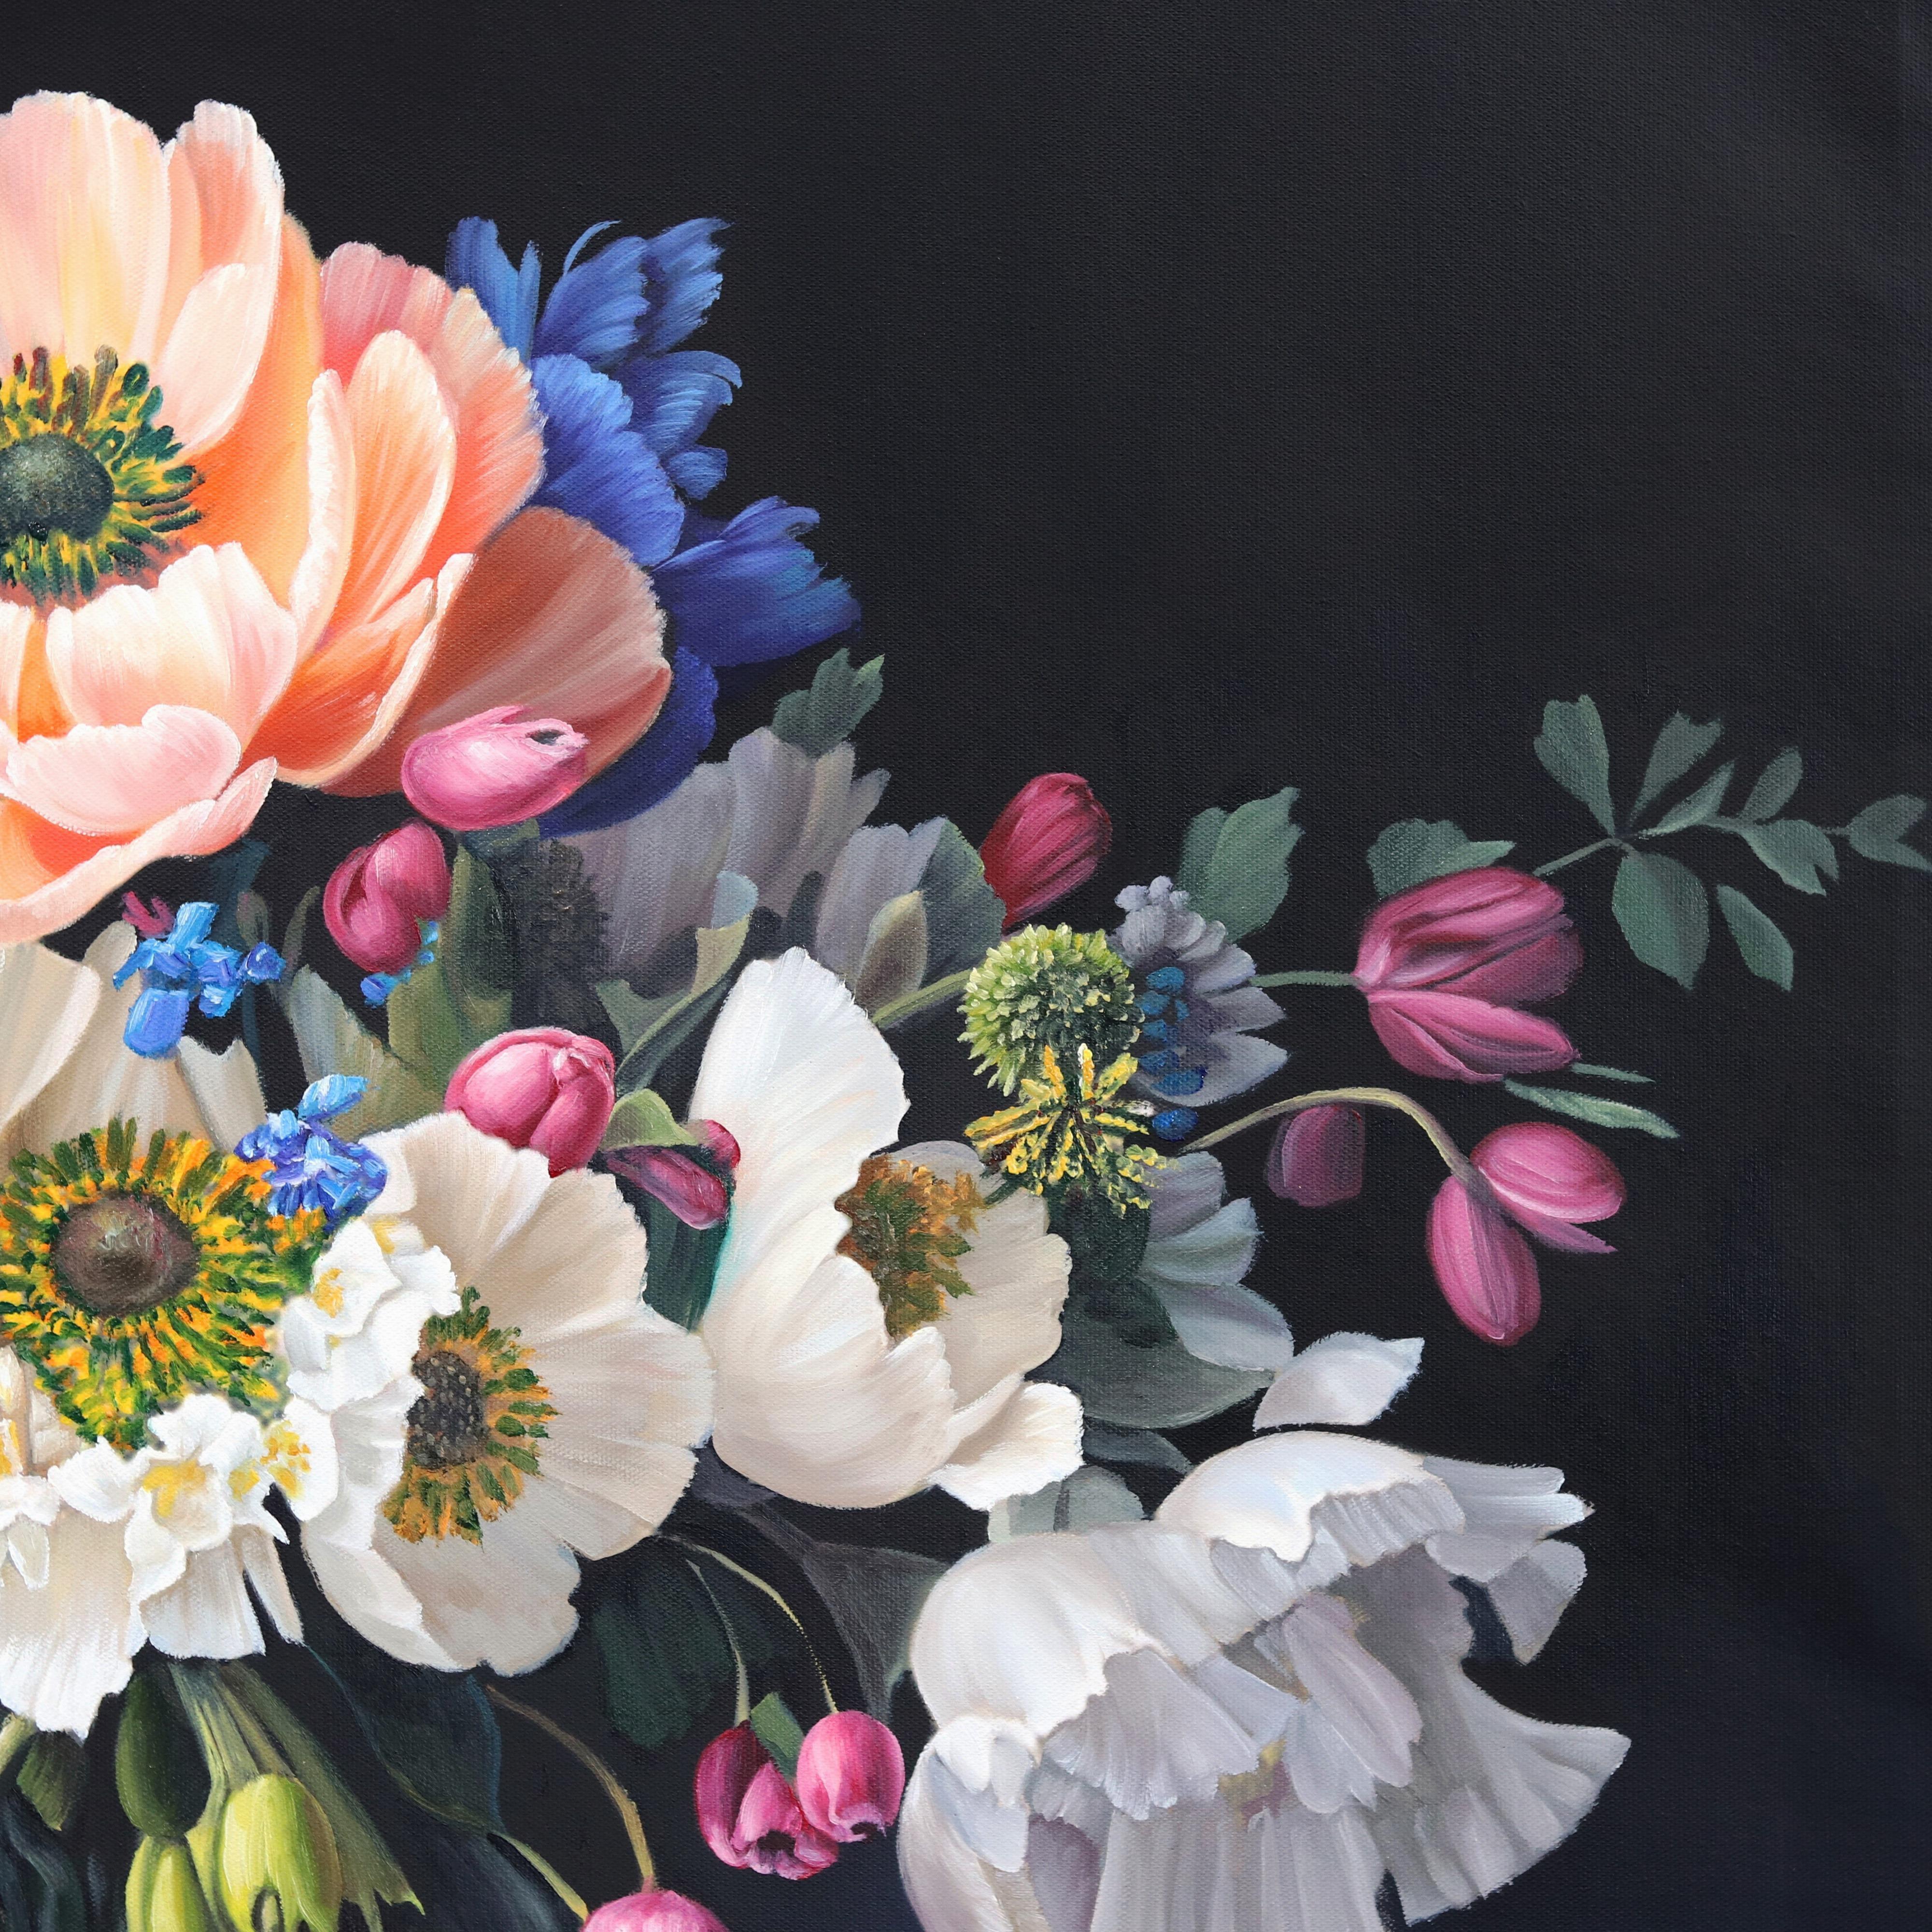 I Have Only My Dreams - Hyperrealist Botanical Floral Still Life Oil Painting 3